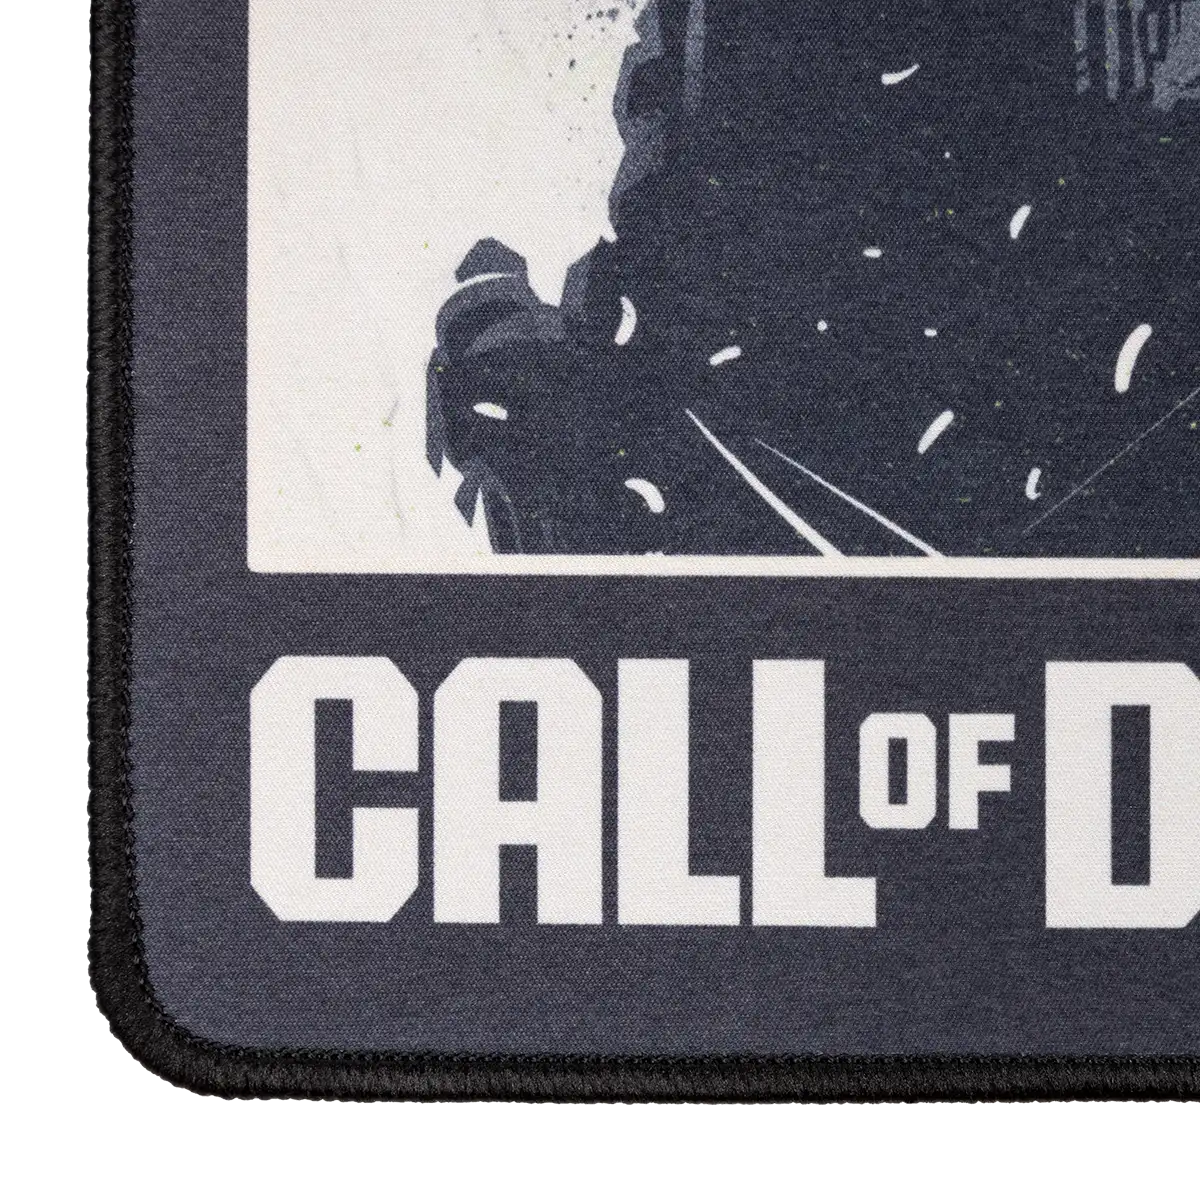 Call of Duty Mousemat "Keyart Collage" Image 4